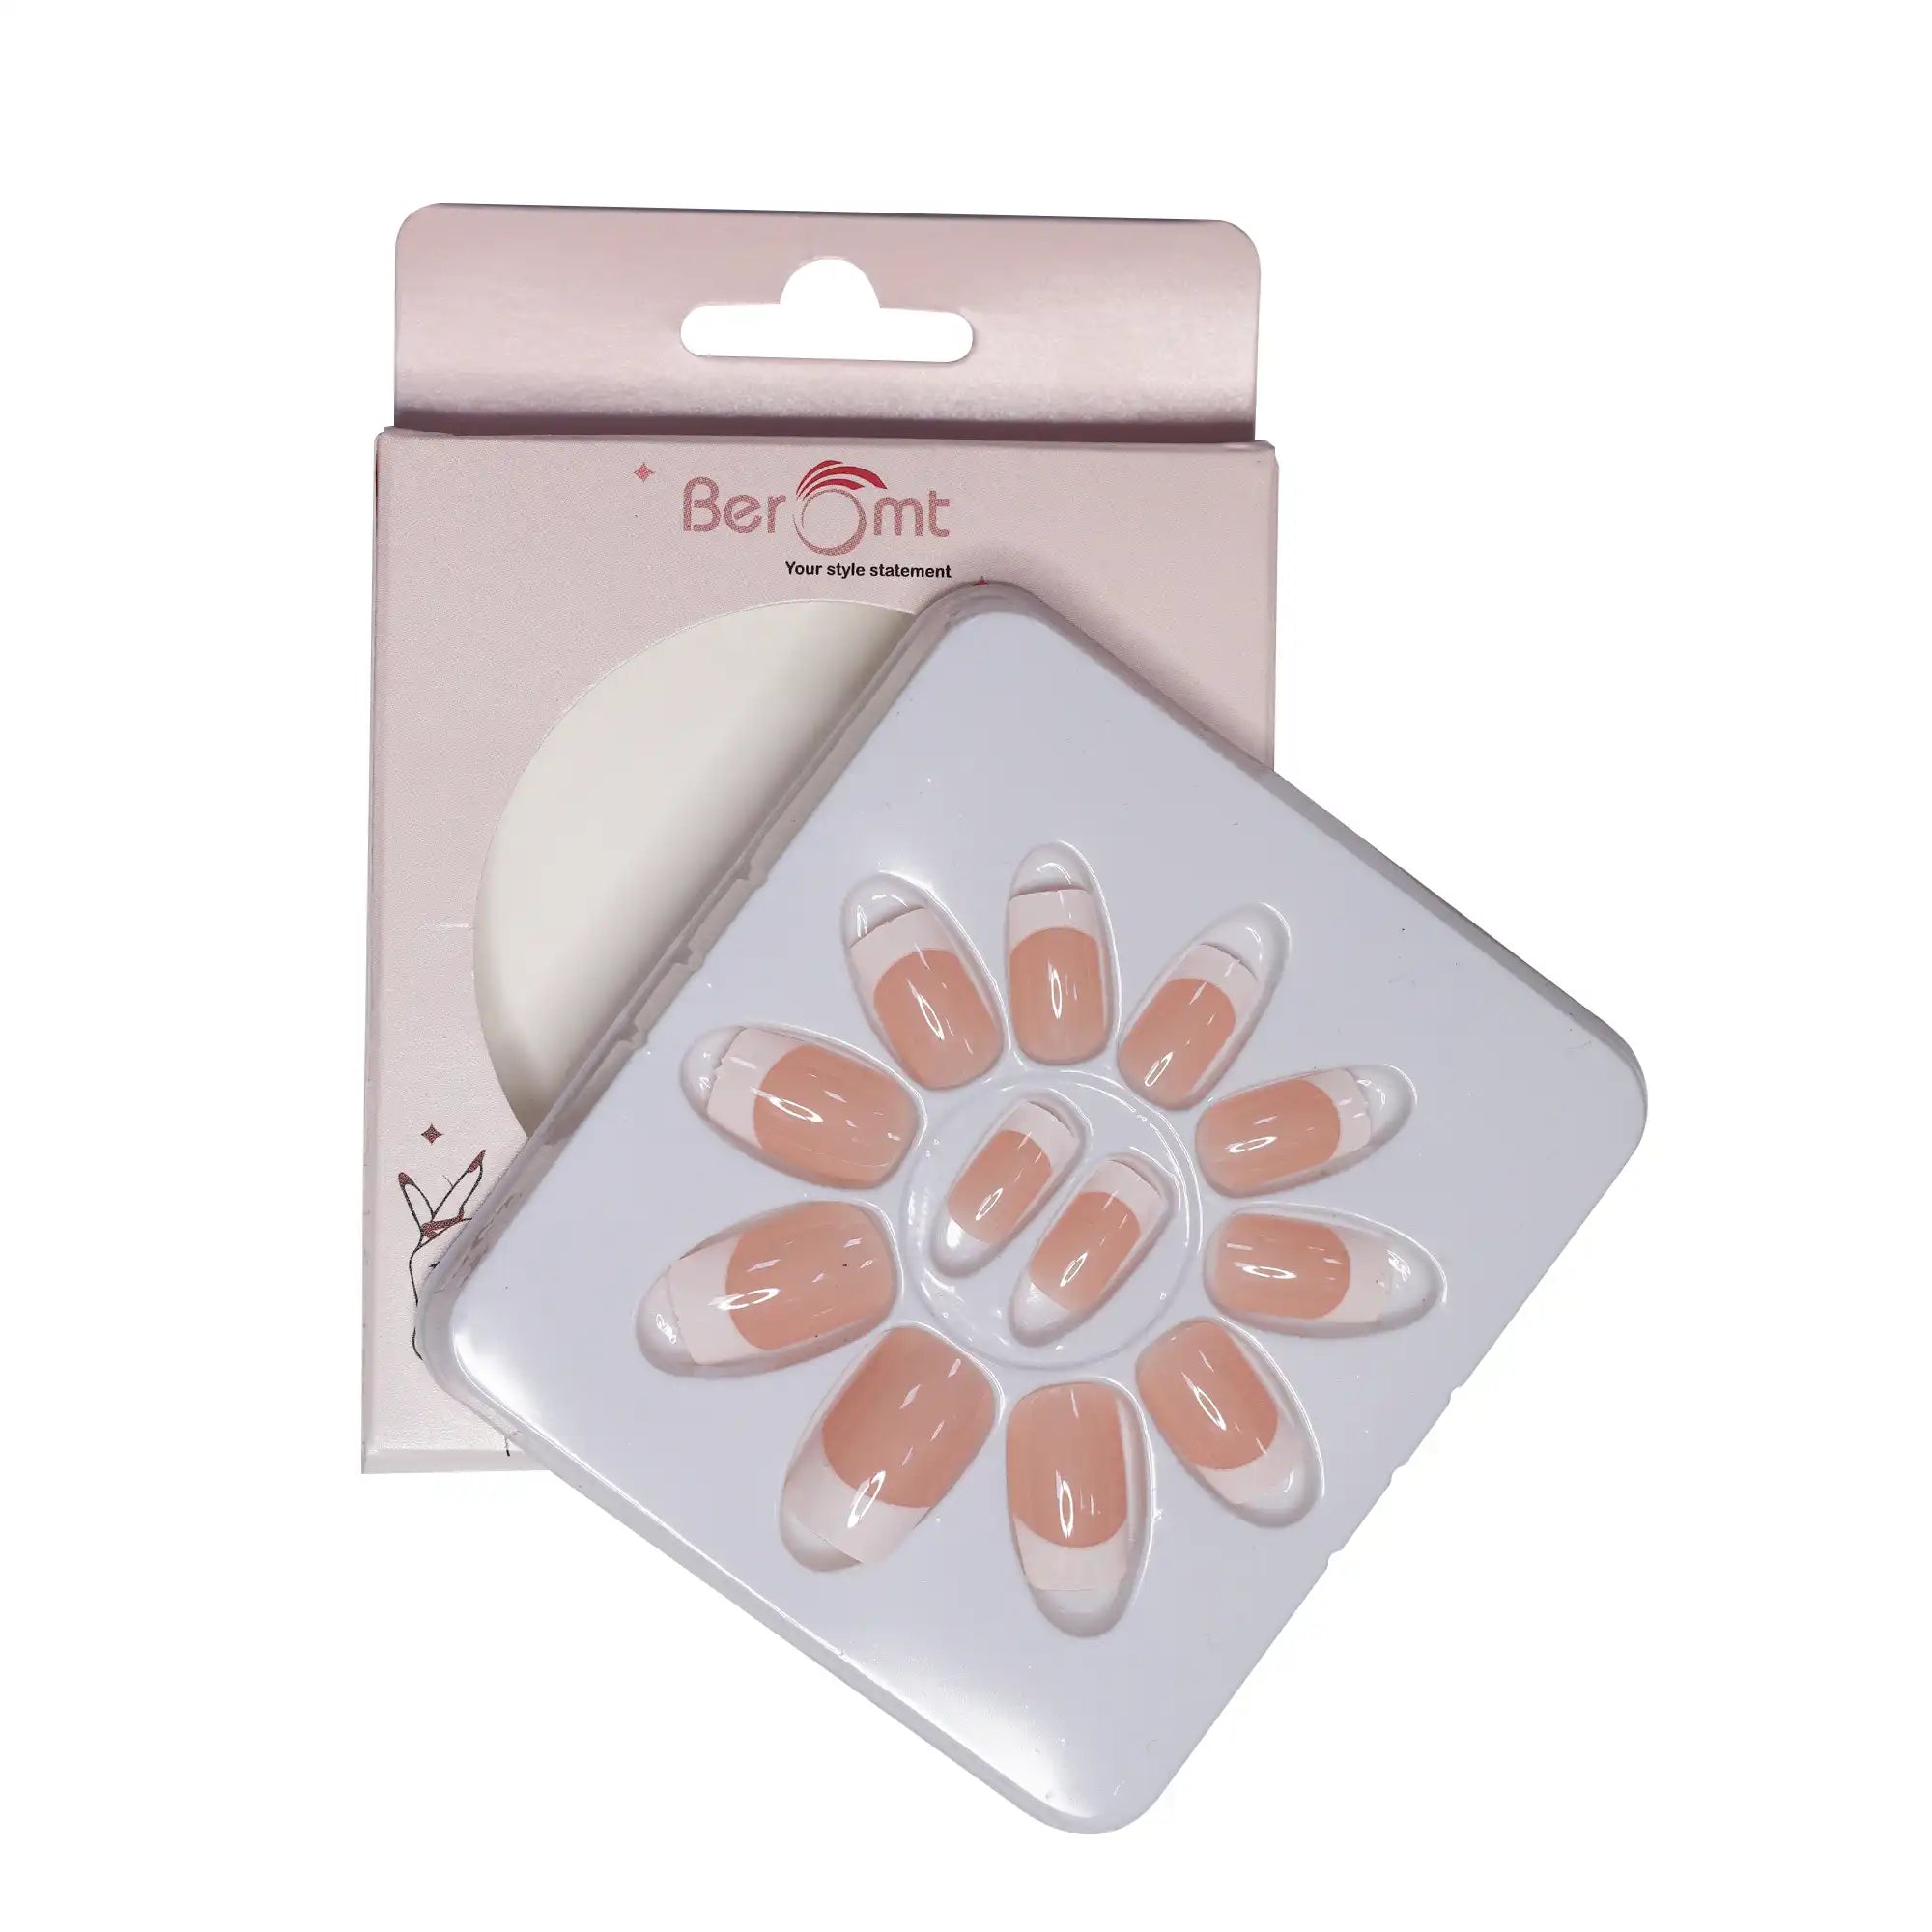 FRENCH TIPS- 275 (NAIL KIT INCLUDED)